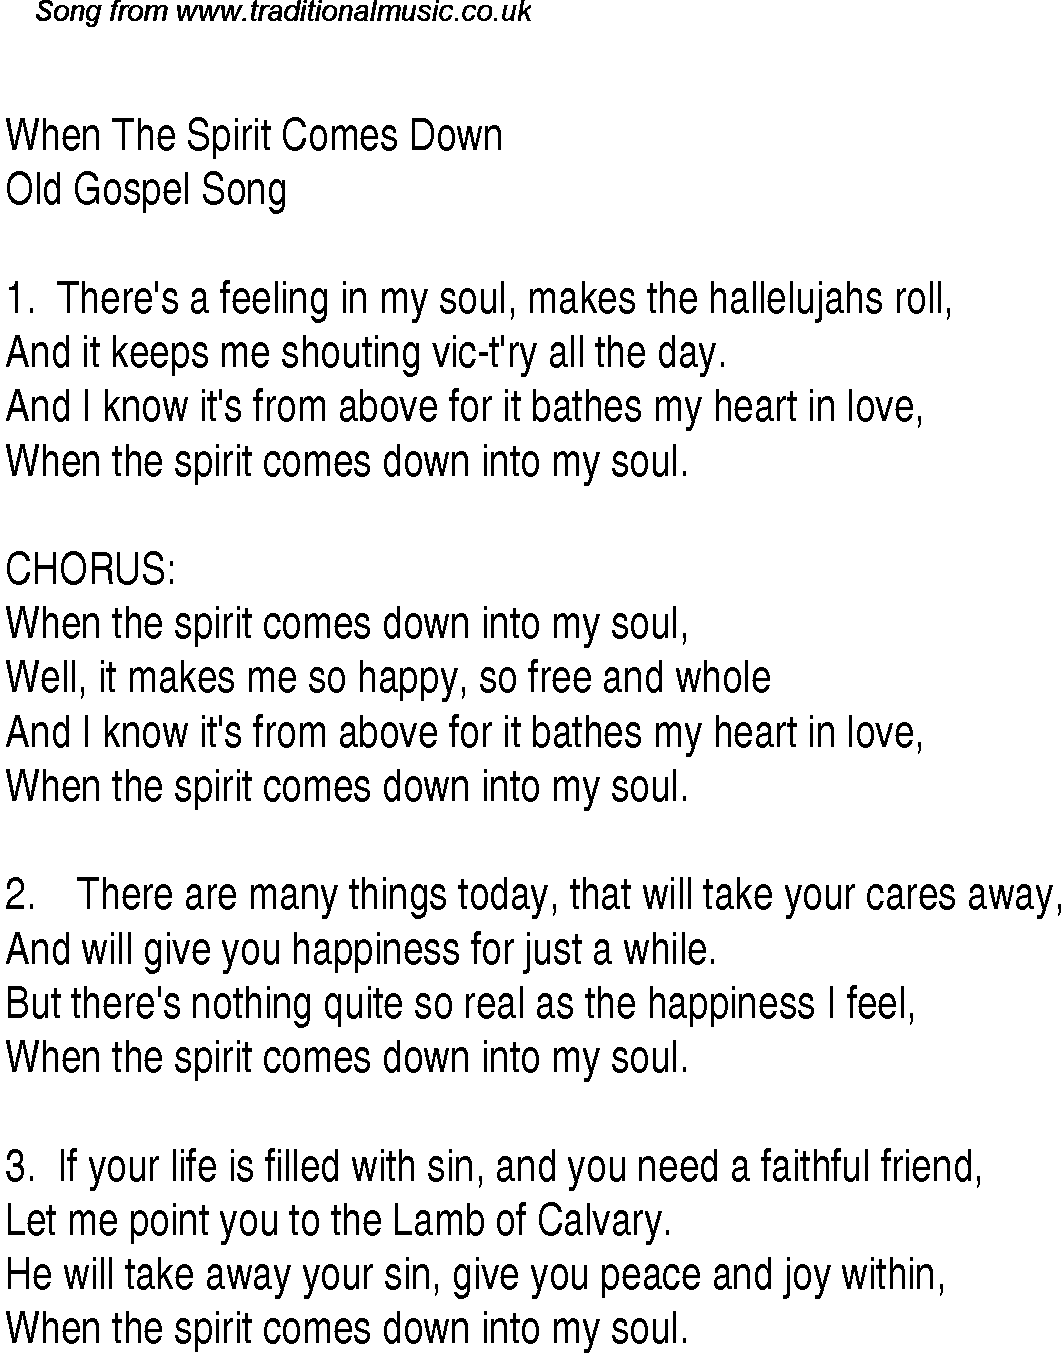 Gospel Song: when-the-spirit-comes-down, lyrics and chords.